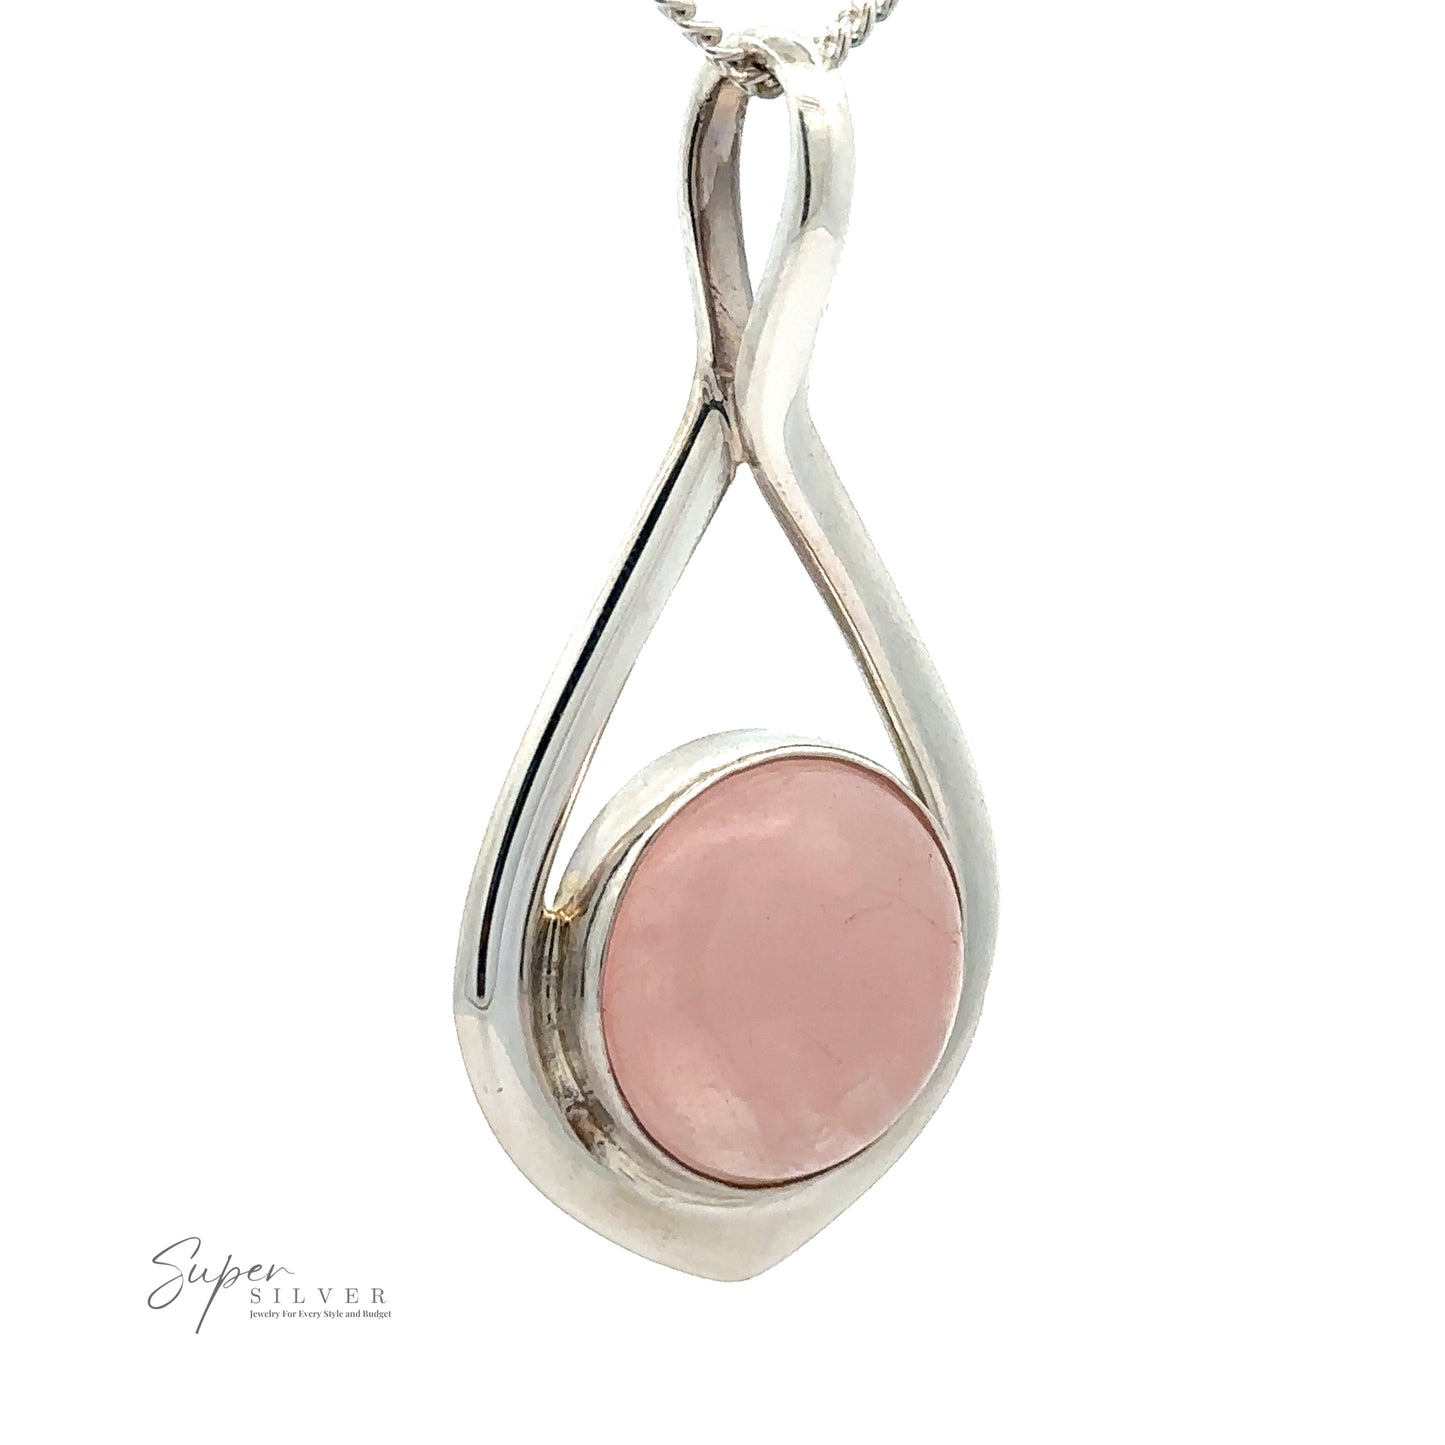 
                  
                    A Rose Quartz Teardrop Pendant with a looped design, featuring a round rose quartz stone in the center, suspended on a chain. This elegant piece of emotional healing jewelry radiates charm and tranquility.
                  
                